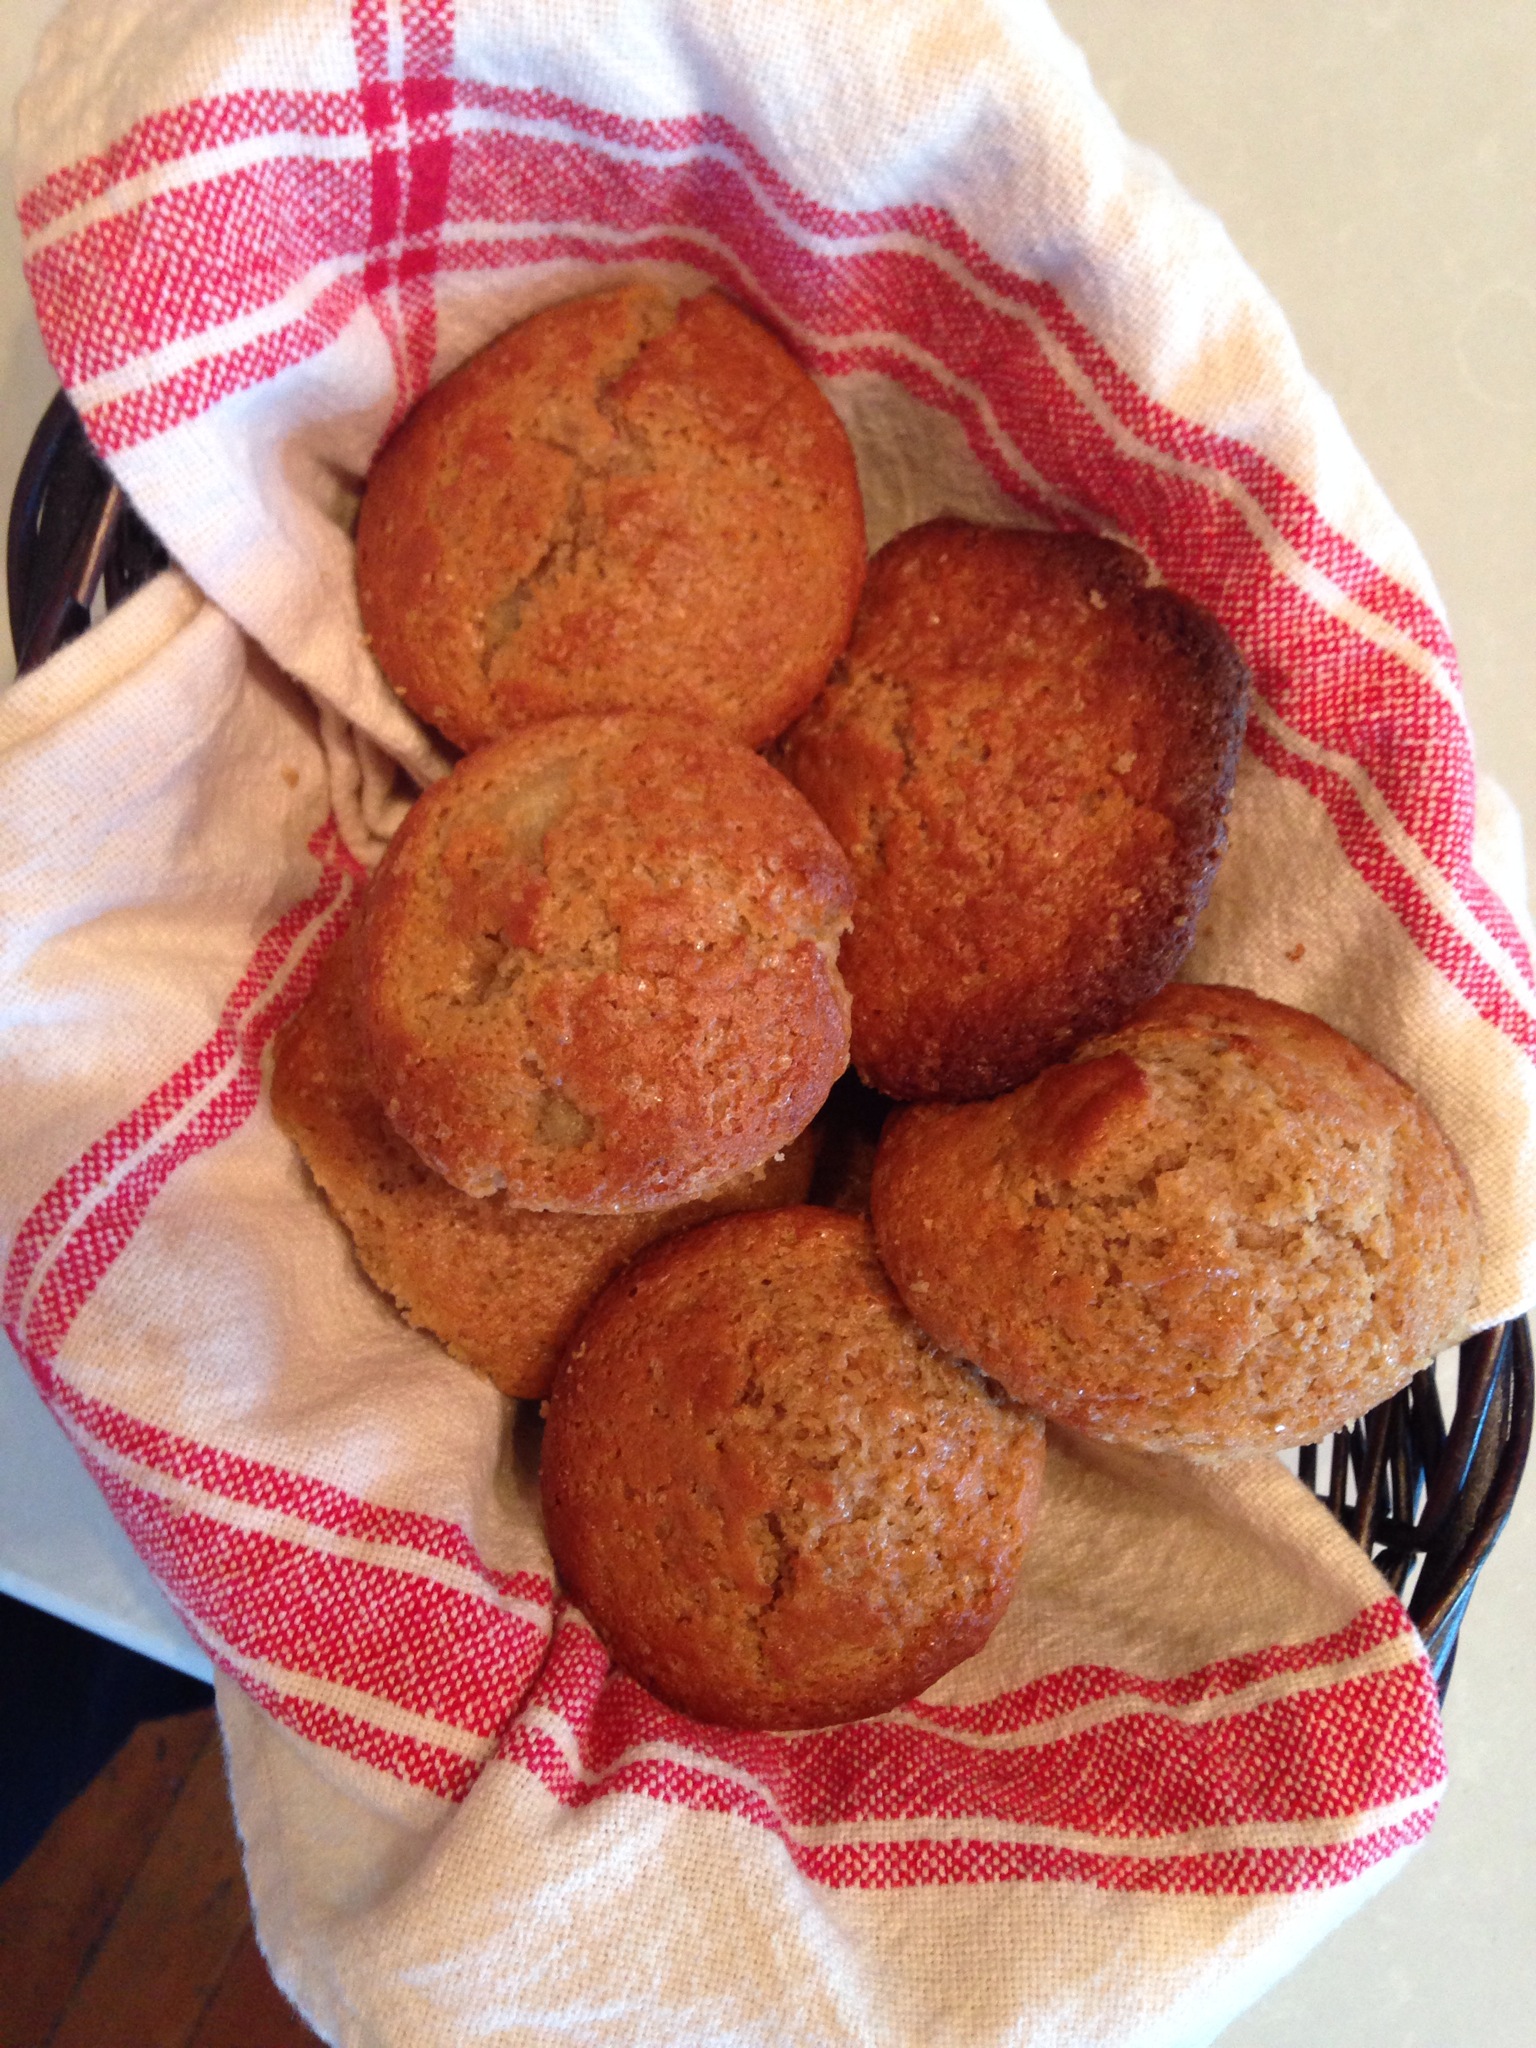 Sunday, Coffee and Pear Cinnamon Muffins – Simply the Best!